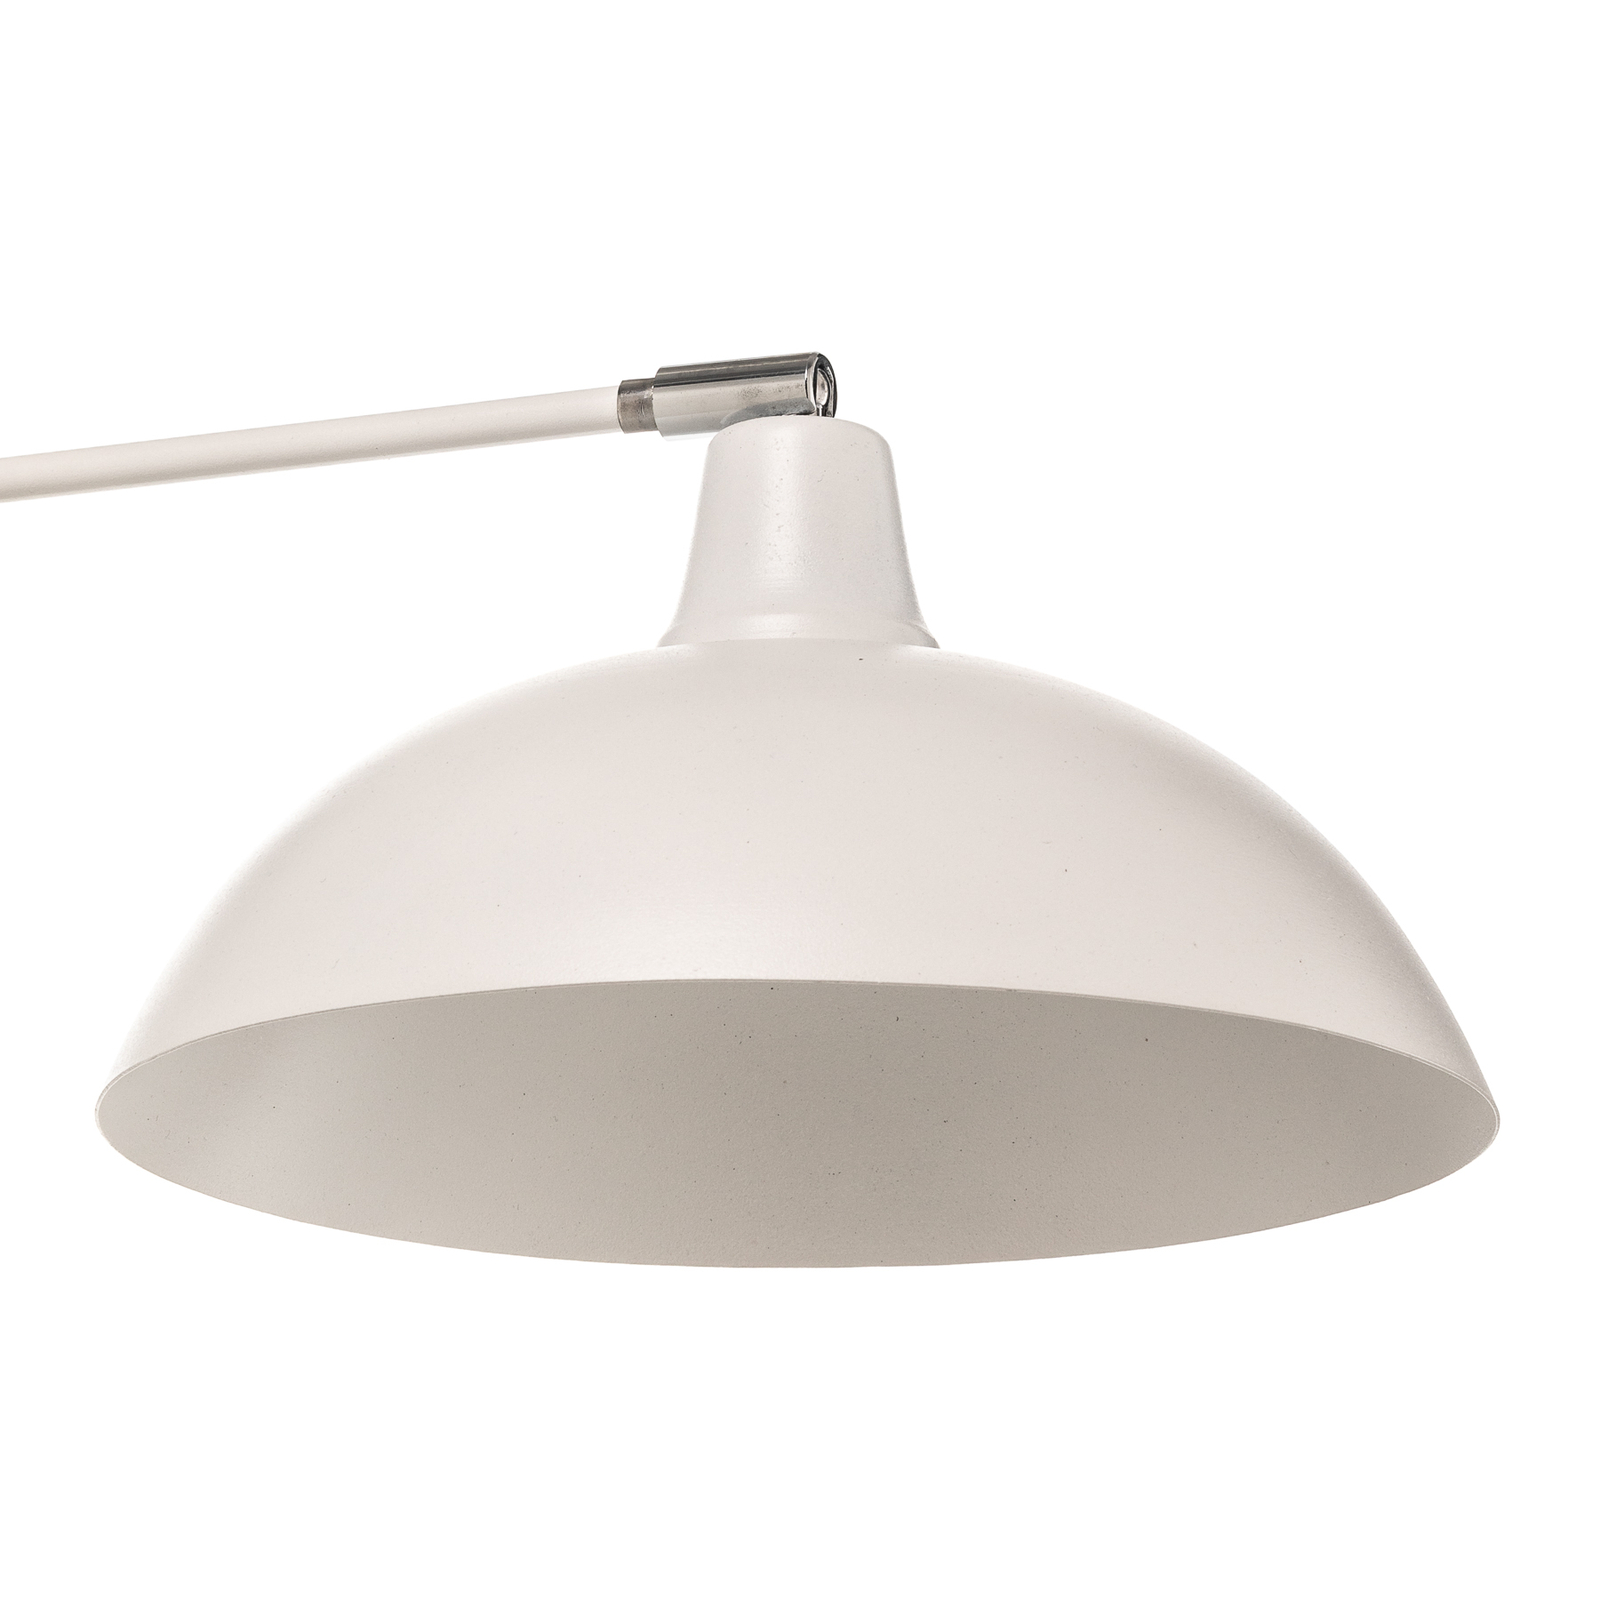 Hanglamp 1036, 3-lamps, wit